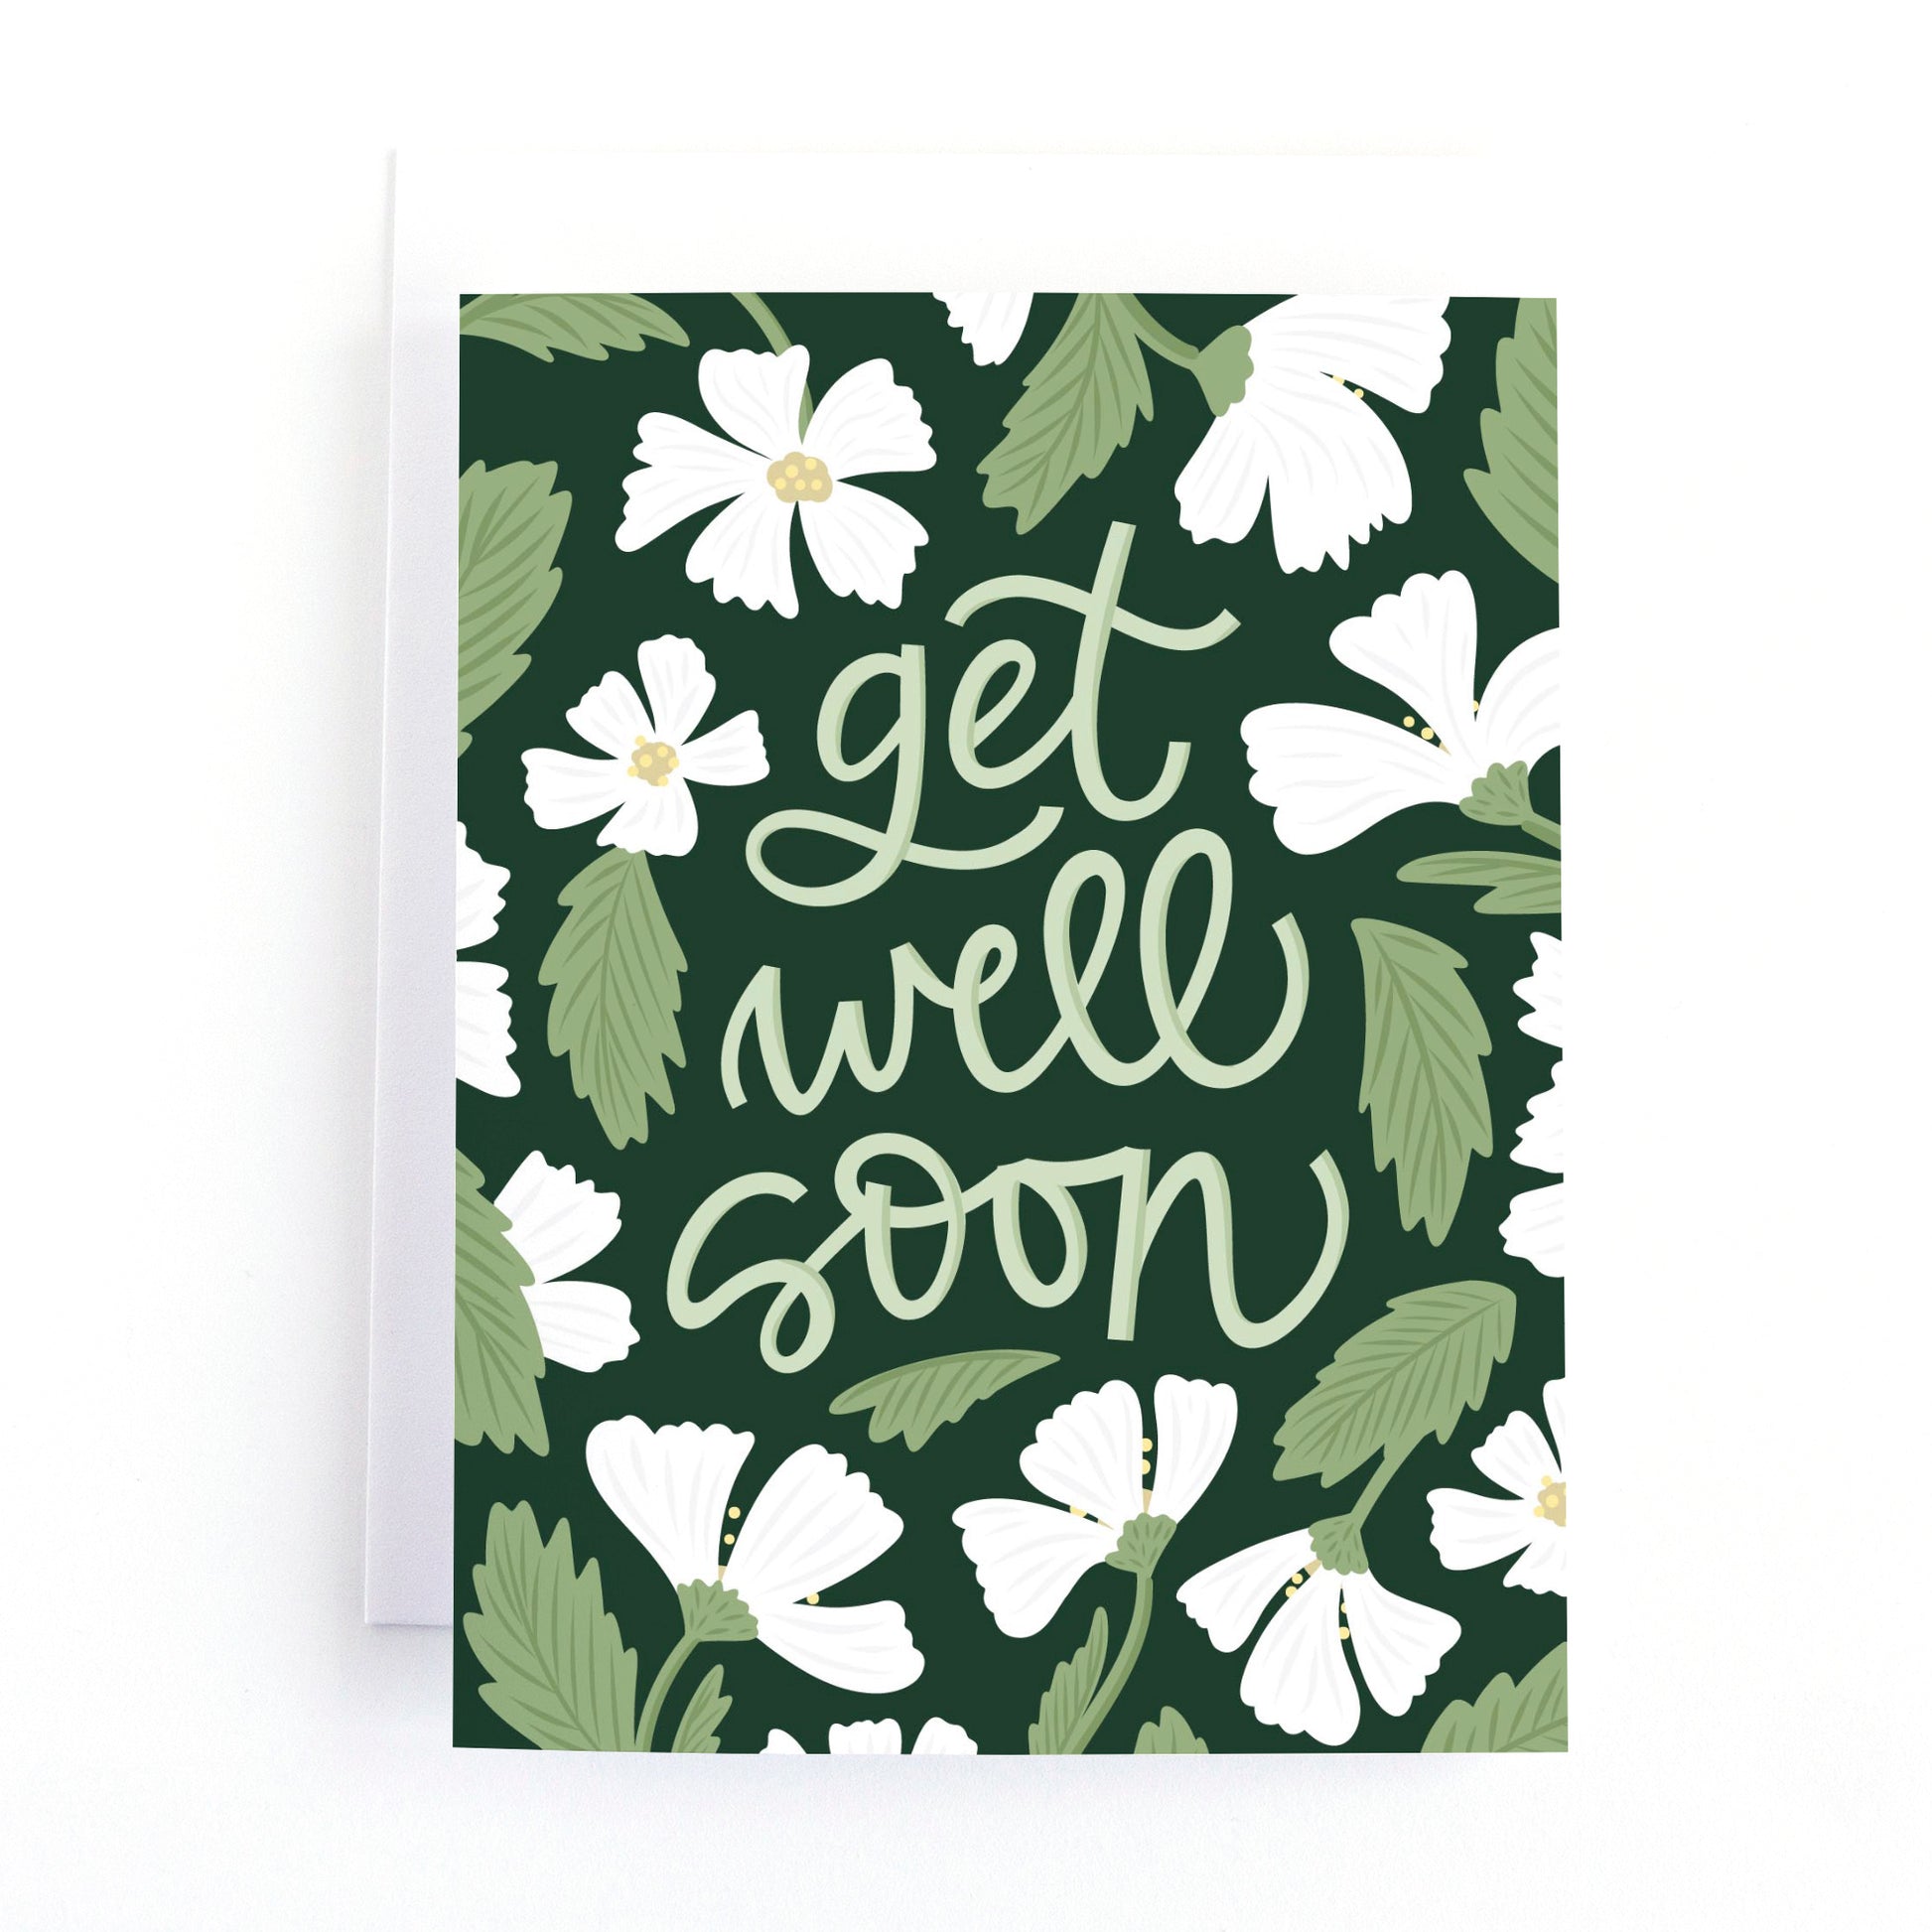 Get Well soon card with delicate white flower stems surrounding the hand lettered greeting, get well soon on a dark green background.